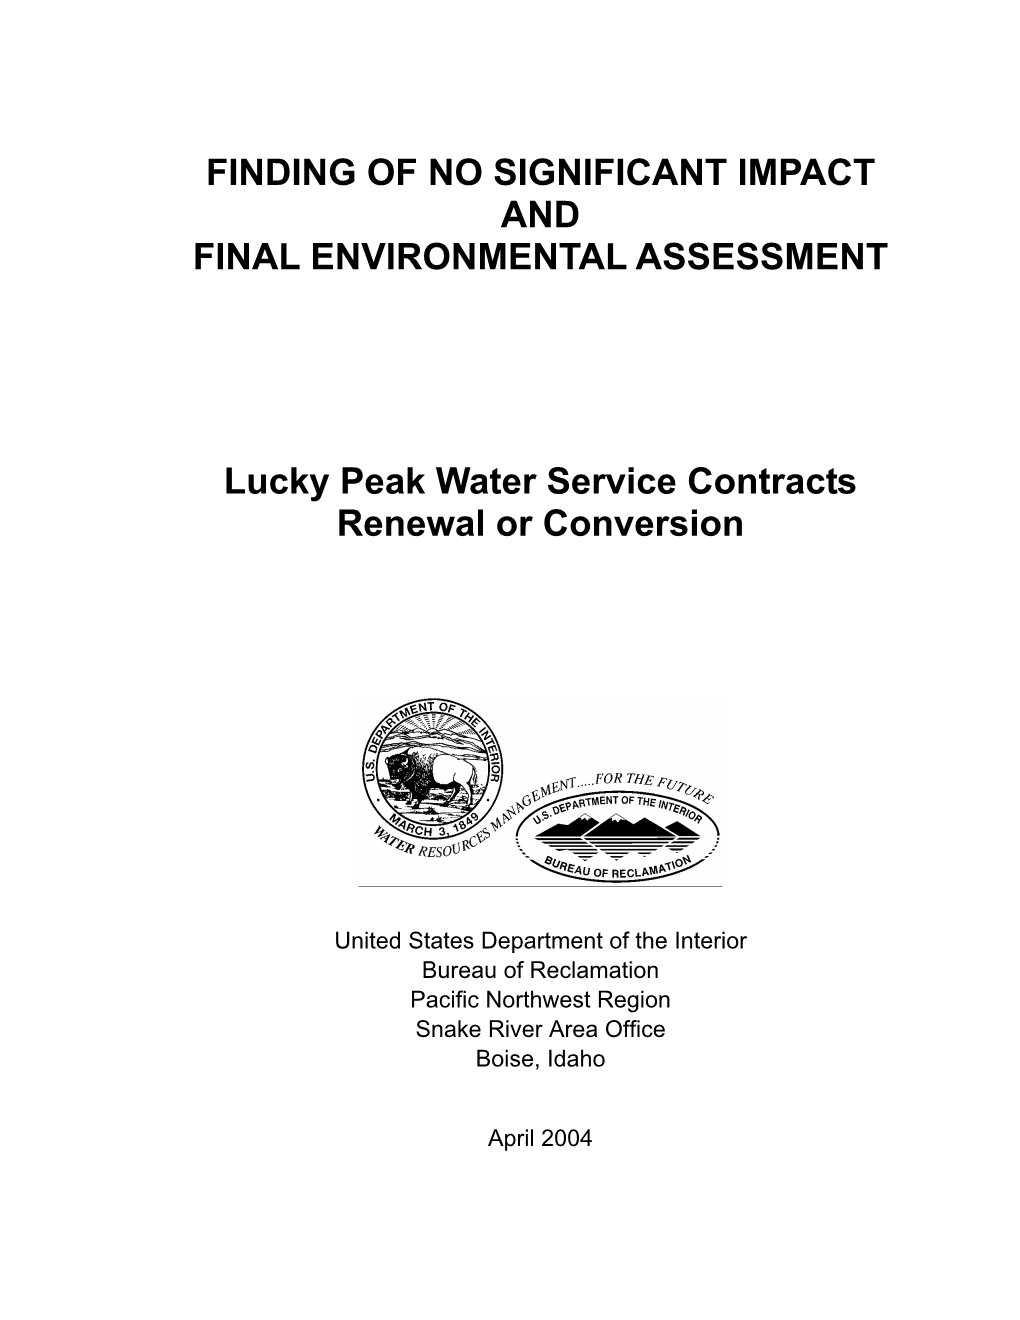 Lucky Peak Water Service Contracts Renewal Or Conversion, FONSI And